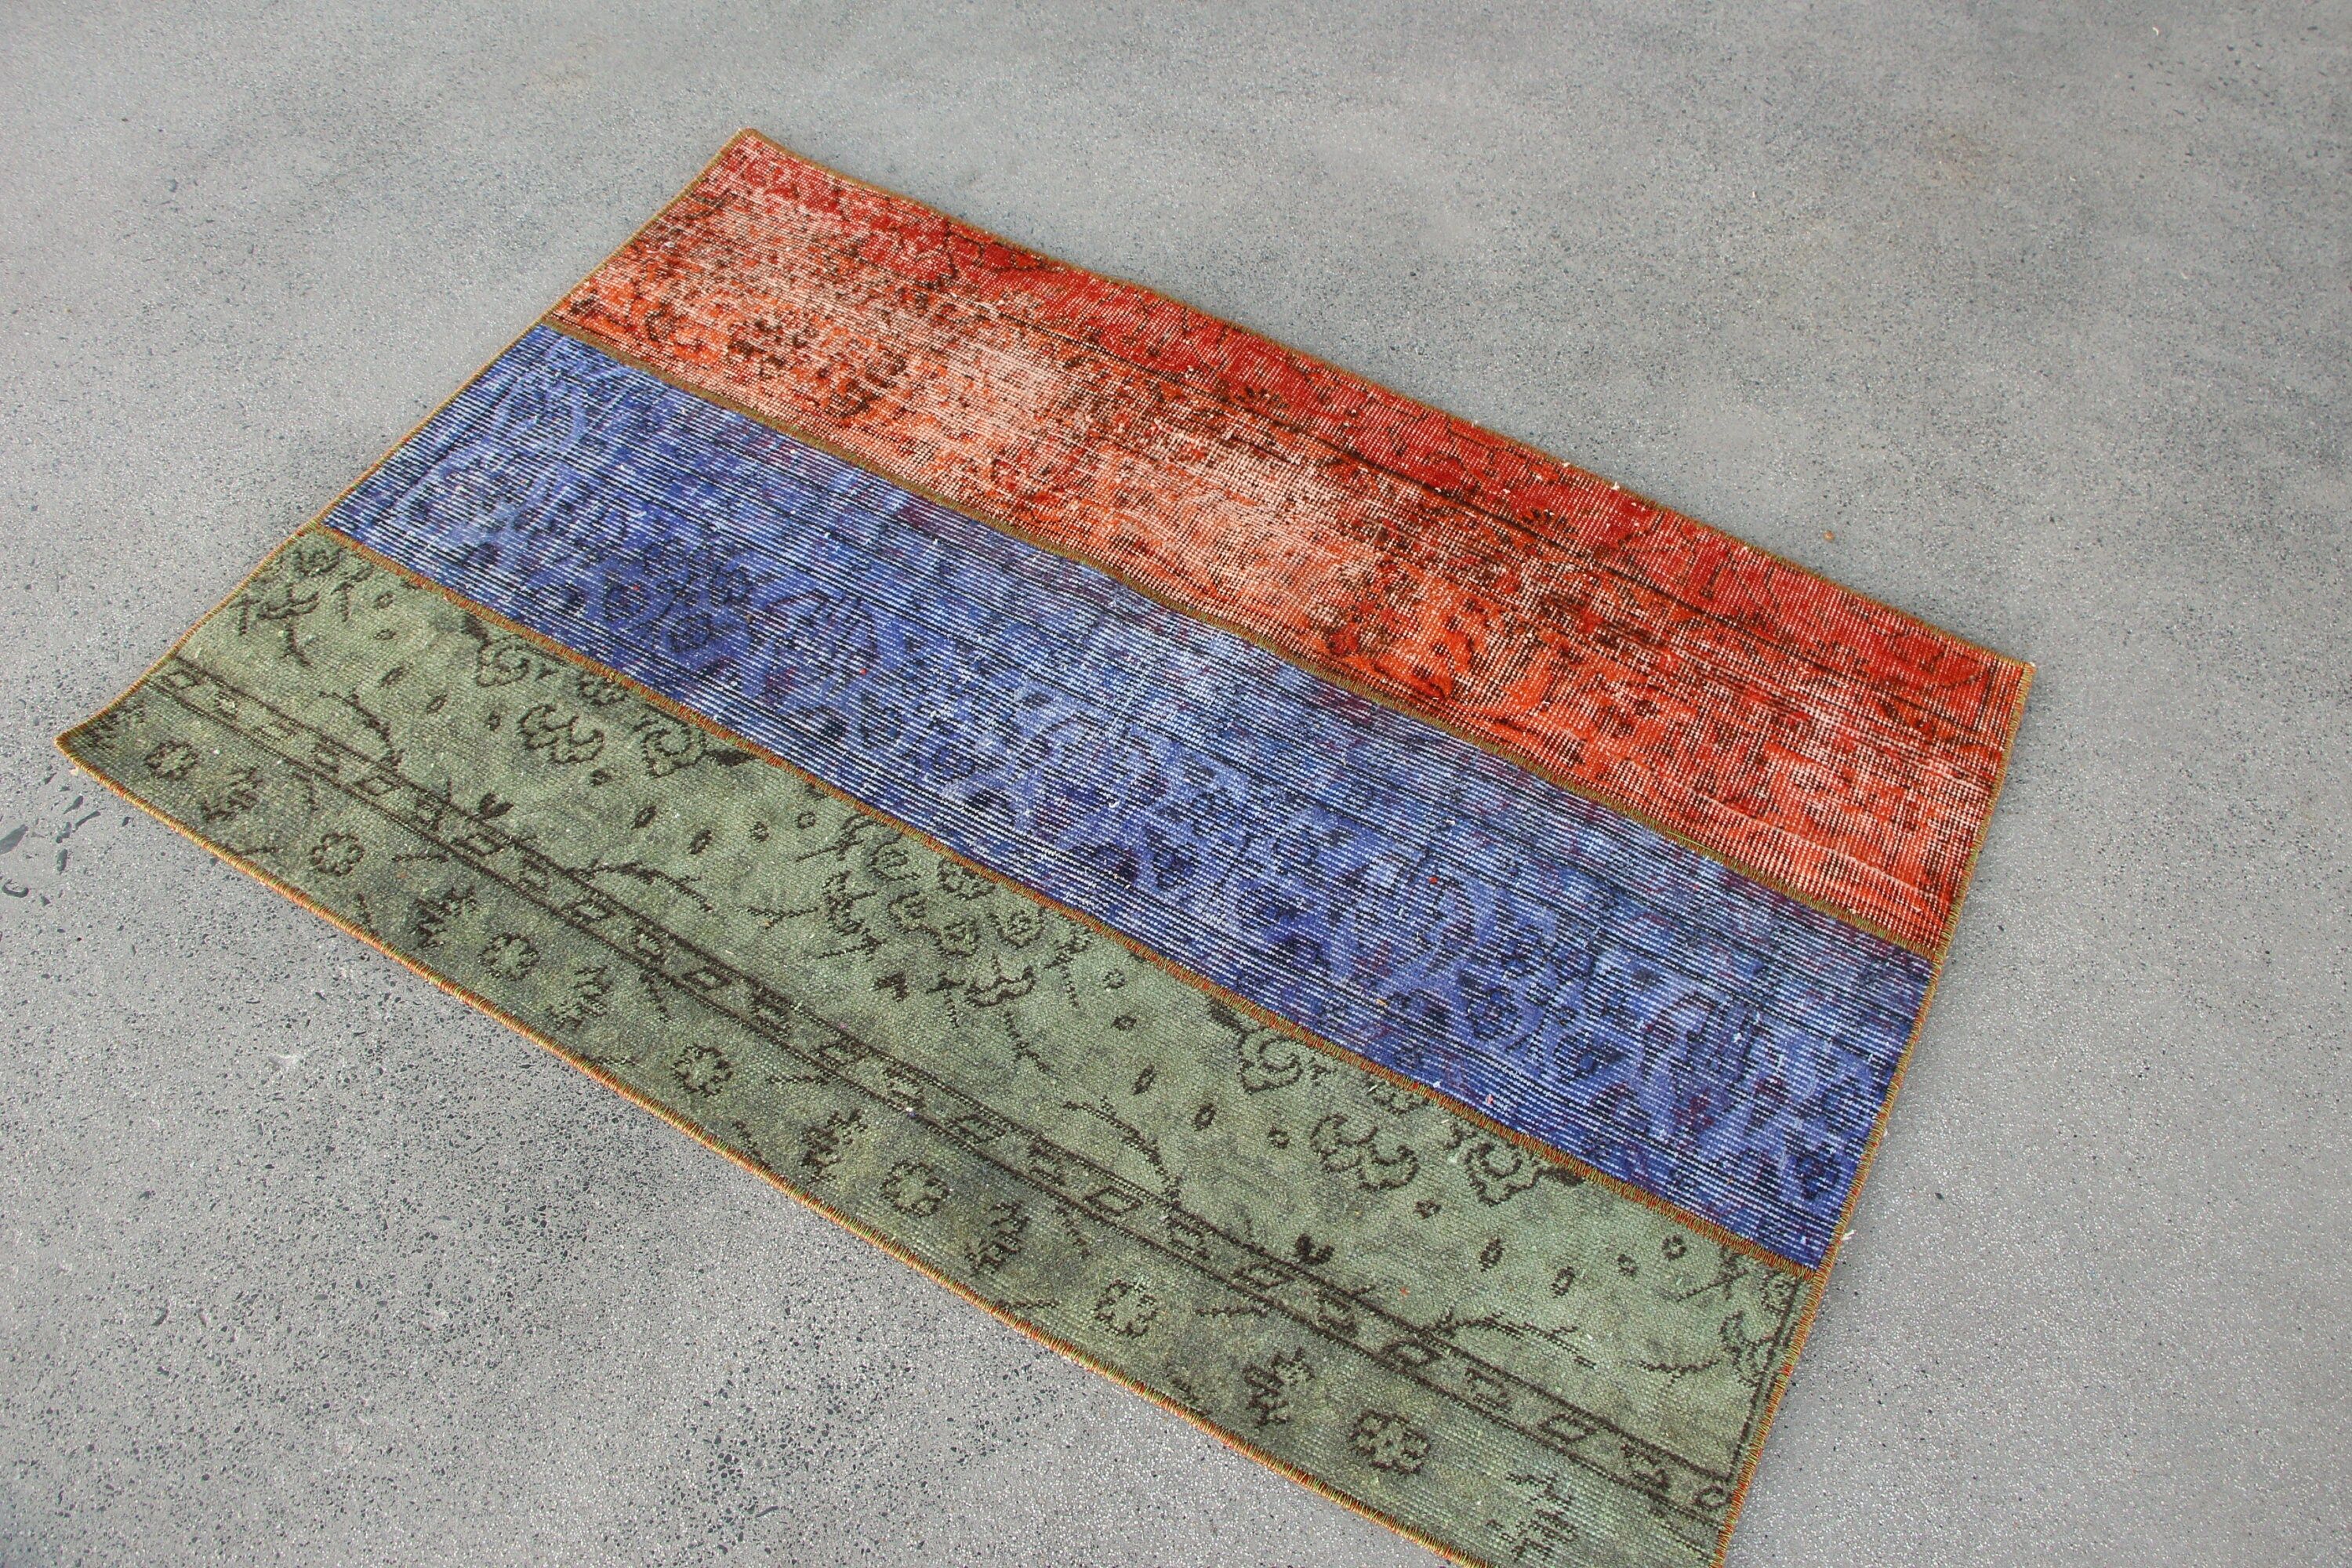 Vintage Rug, 3x4.5 ft Small Rugs, Home Decor Rugs, Turkish Rugs, Orange Home Decor Rug, Bedroom Rug, Kitchen Rug, Rugs for Wall Hanging